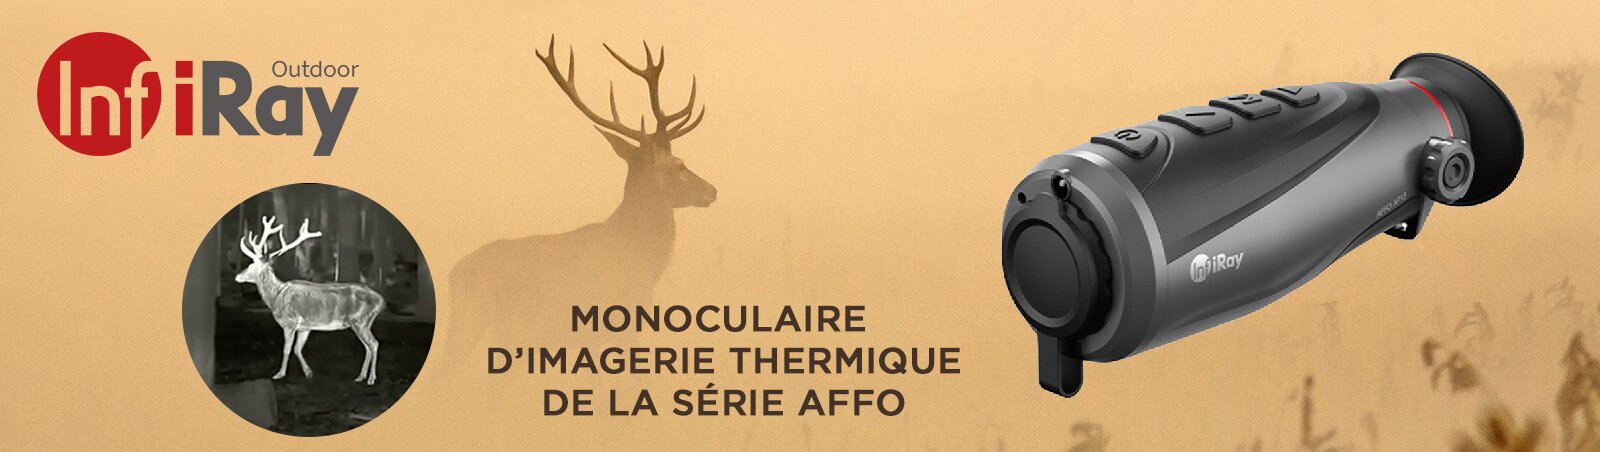 Monoculaire à imagerie thermique Infiray Outdoor AFFO SERIE optique sergent